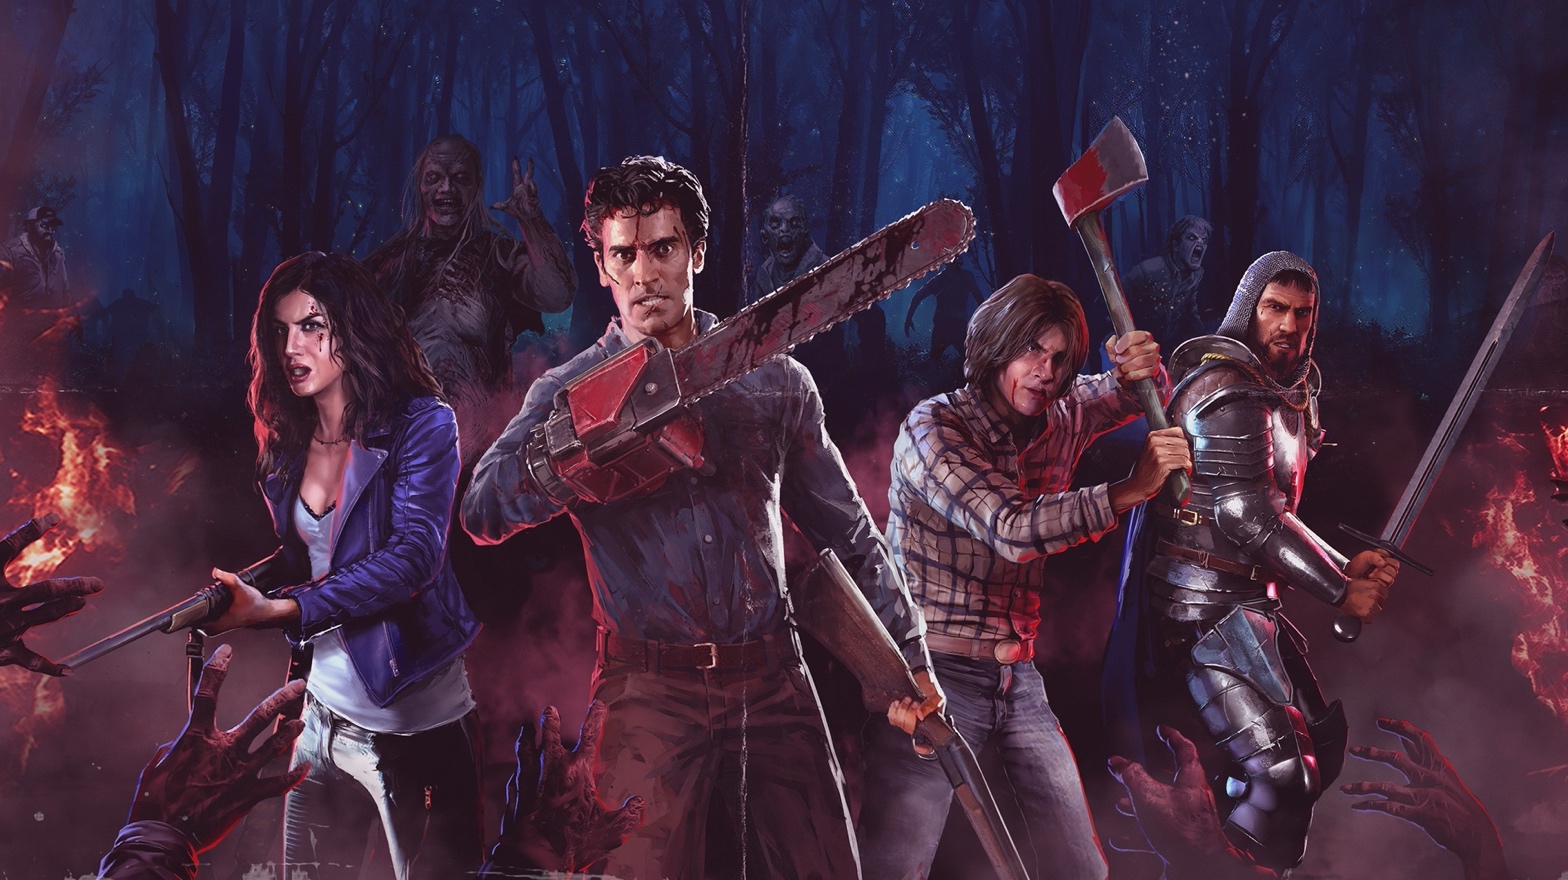 Key art from Evil Dead: The Game from Saber Interactive